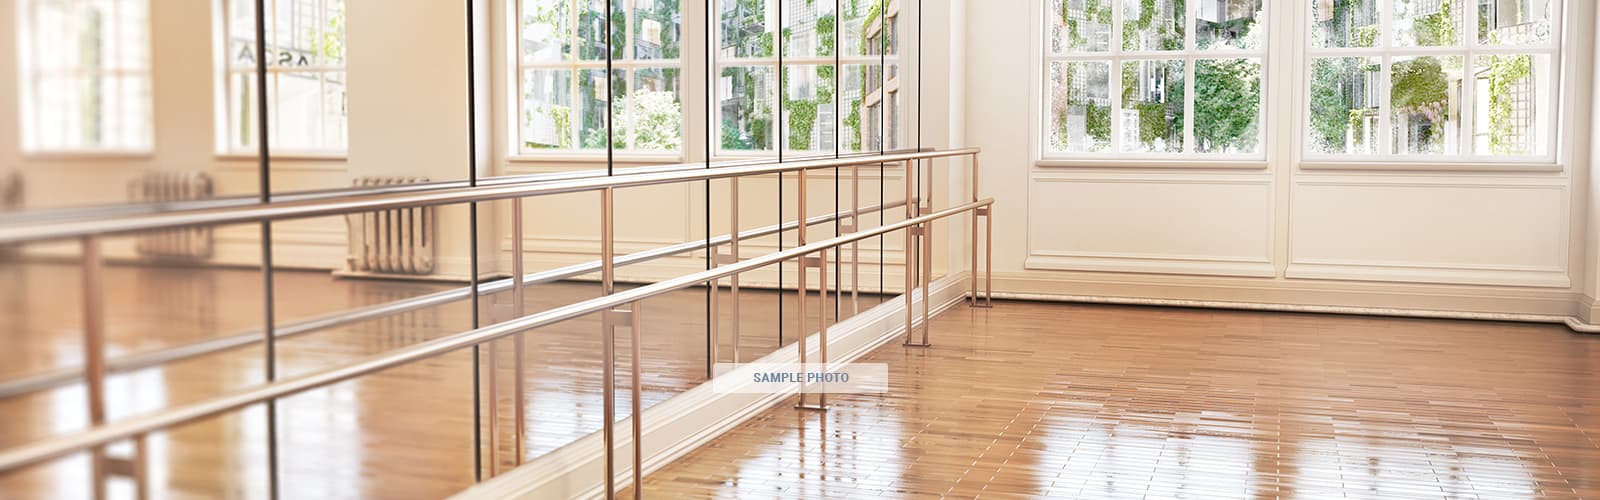 Beverly Vista Middle School Dance Room in Beverly Hills California - undefined